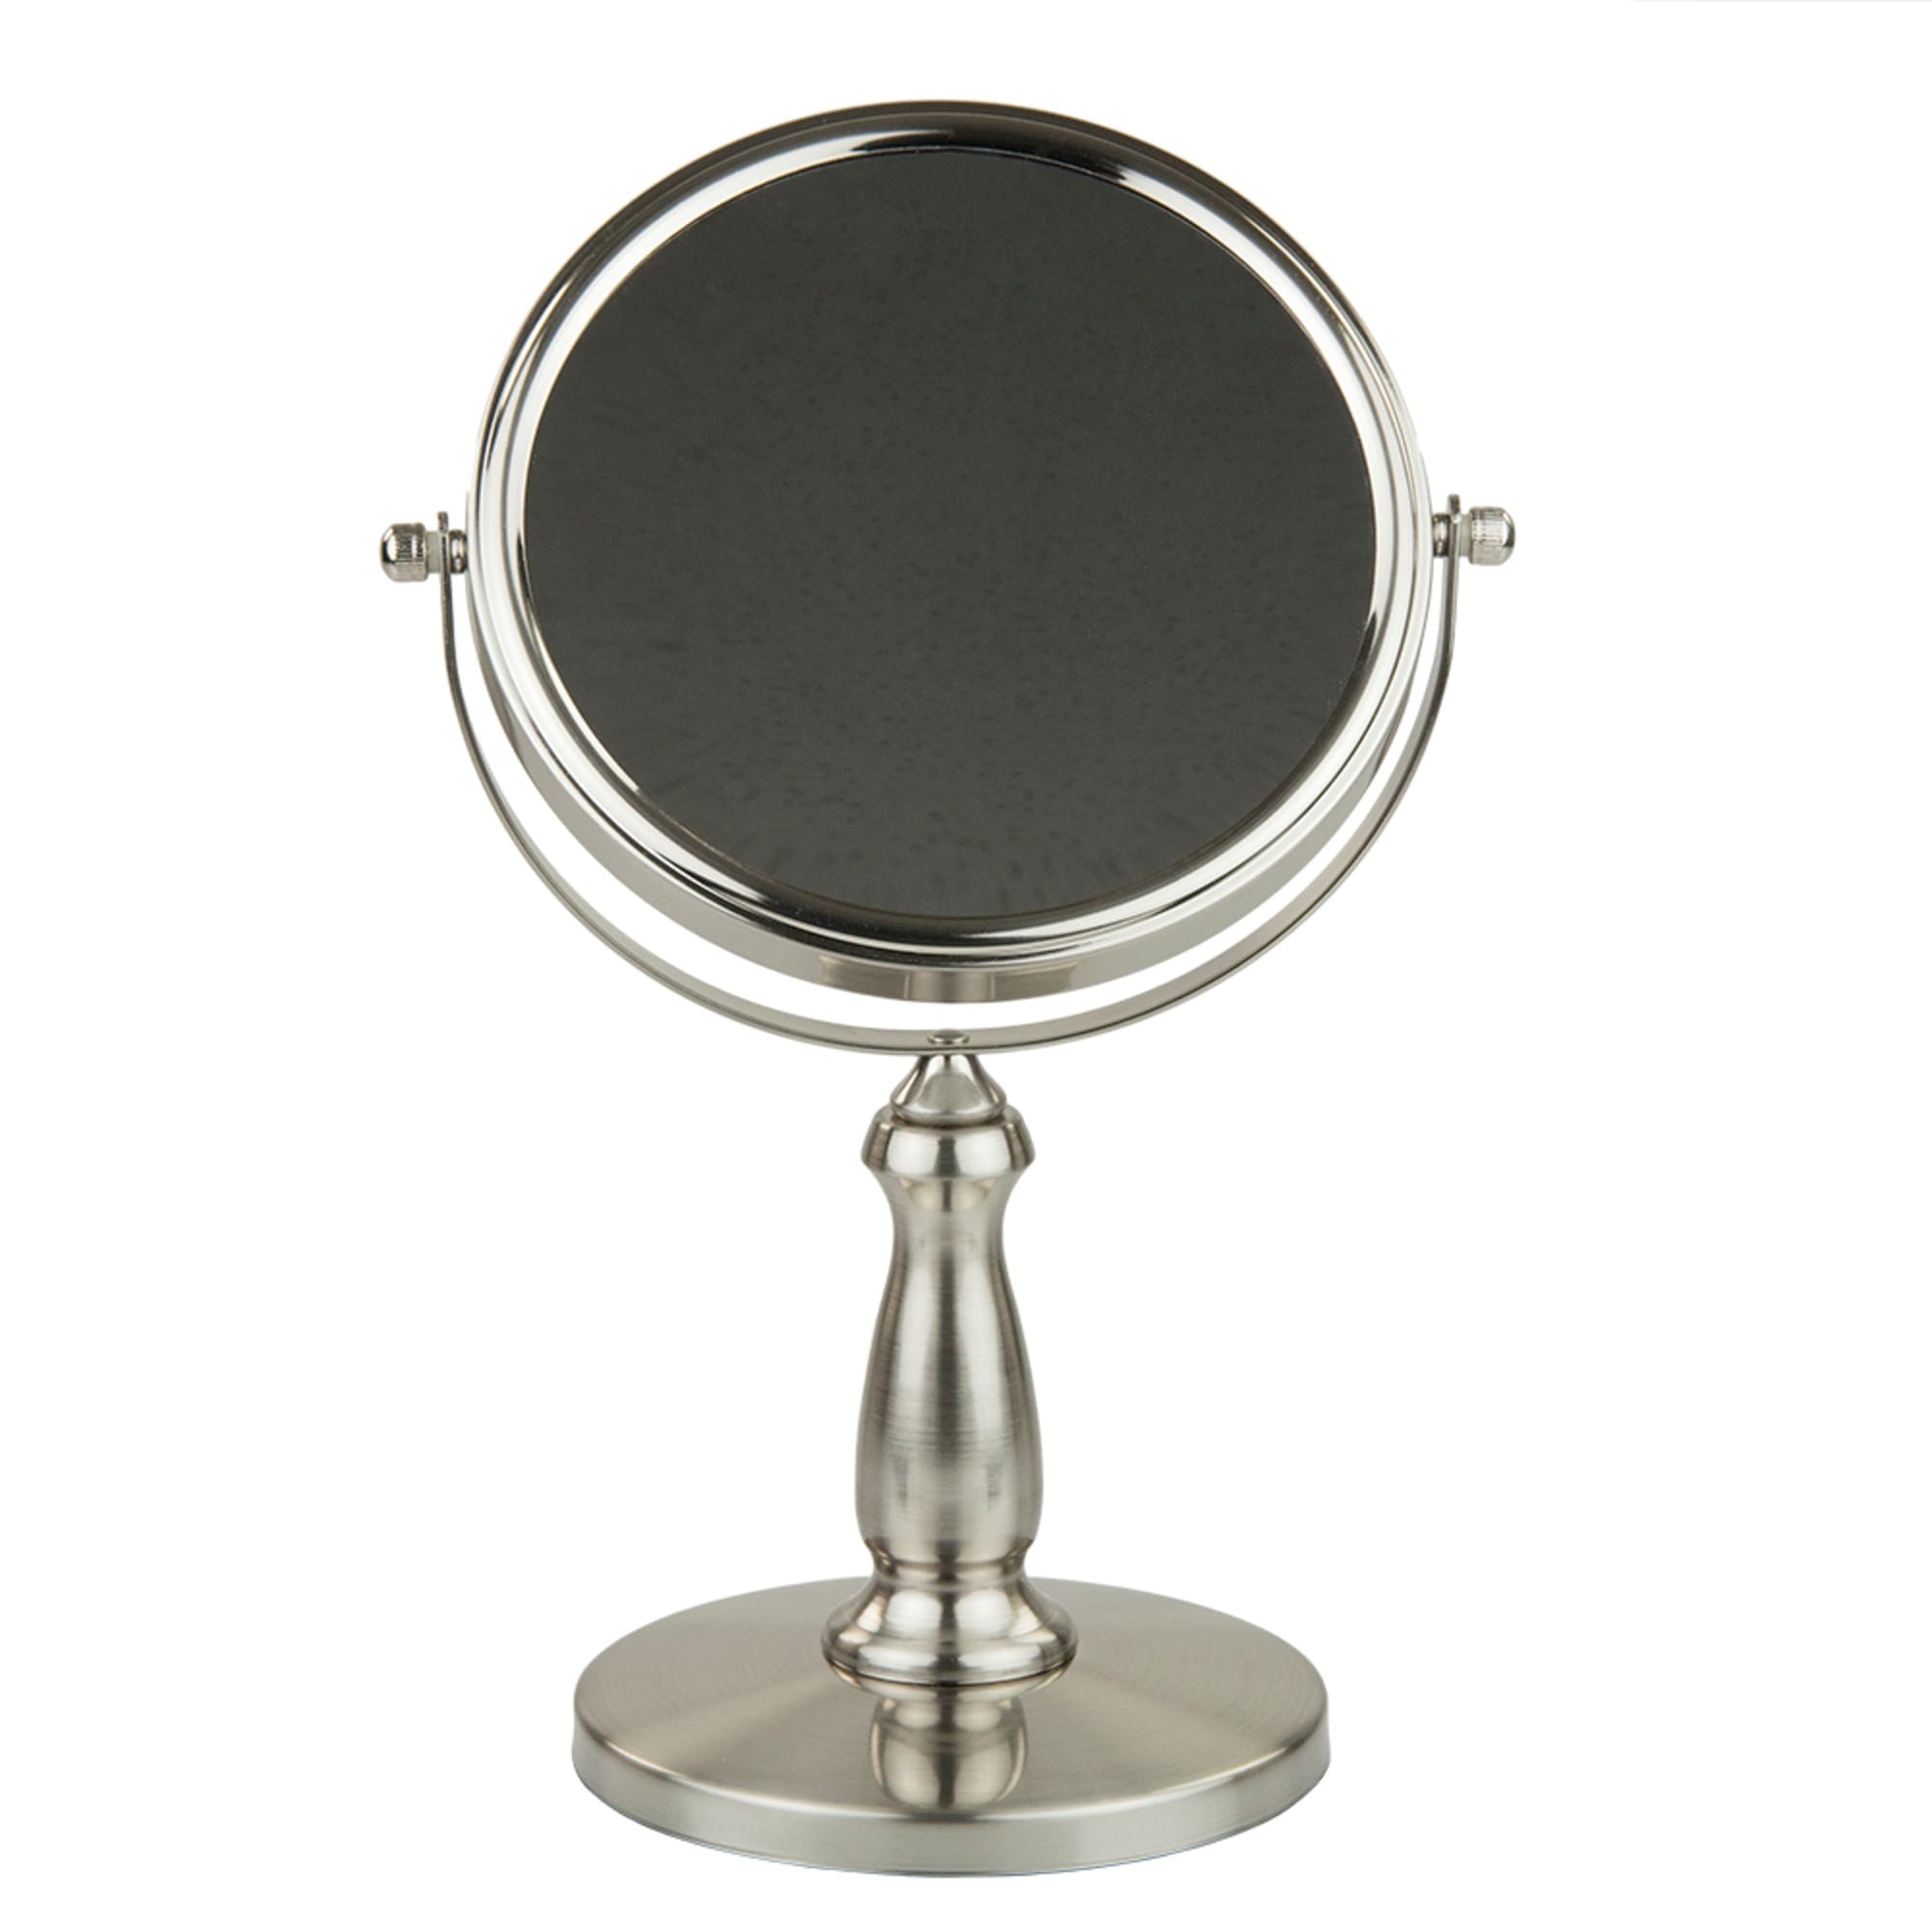 Home Basics Nadia Double Sided Cosmetic Mirror, (1x/5x Magnification), Satin Nickel $15.00 EACH, CASE PACK OF 6